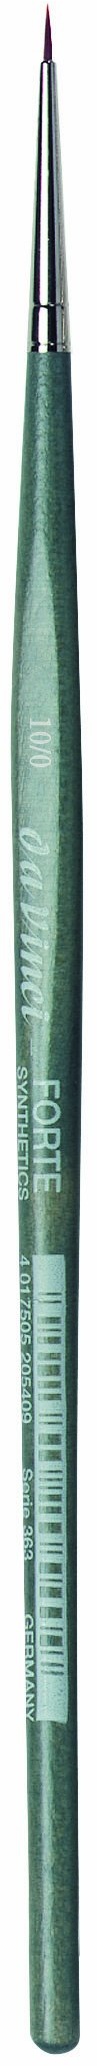 da Vinci Modeling Series 363 Forte Gaming and Craft Brush, Round Extra-Strong Synthetic with Blue-Green Handle, Size 10/0 (363-10/0)